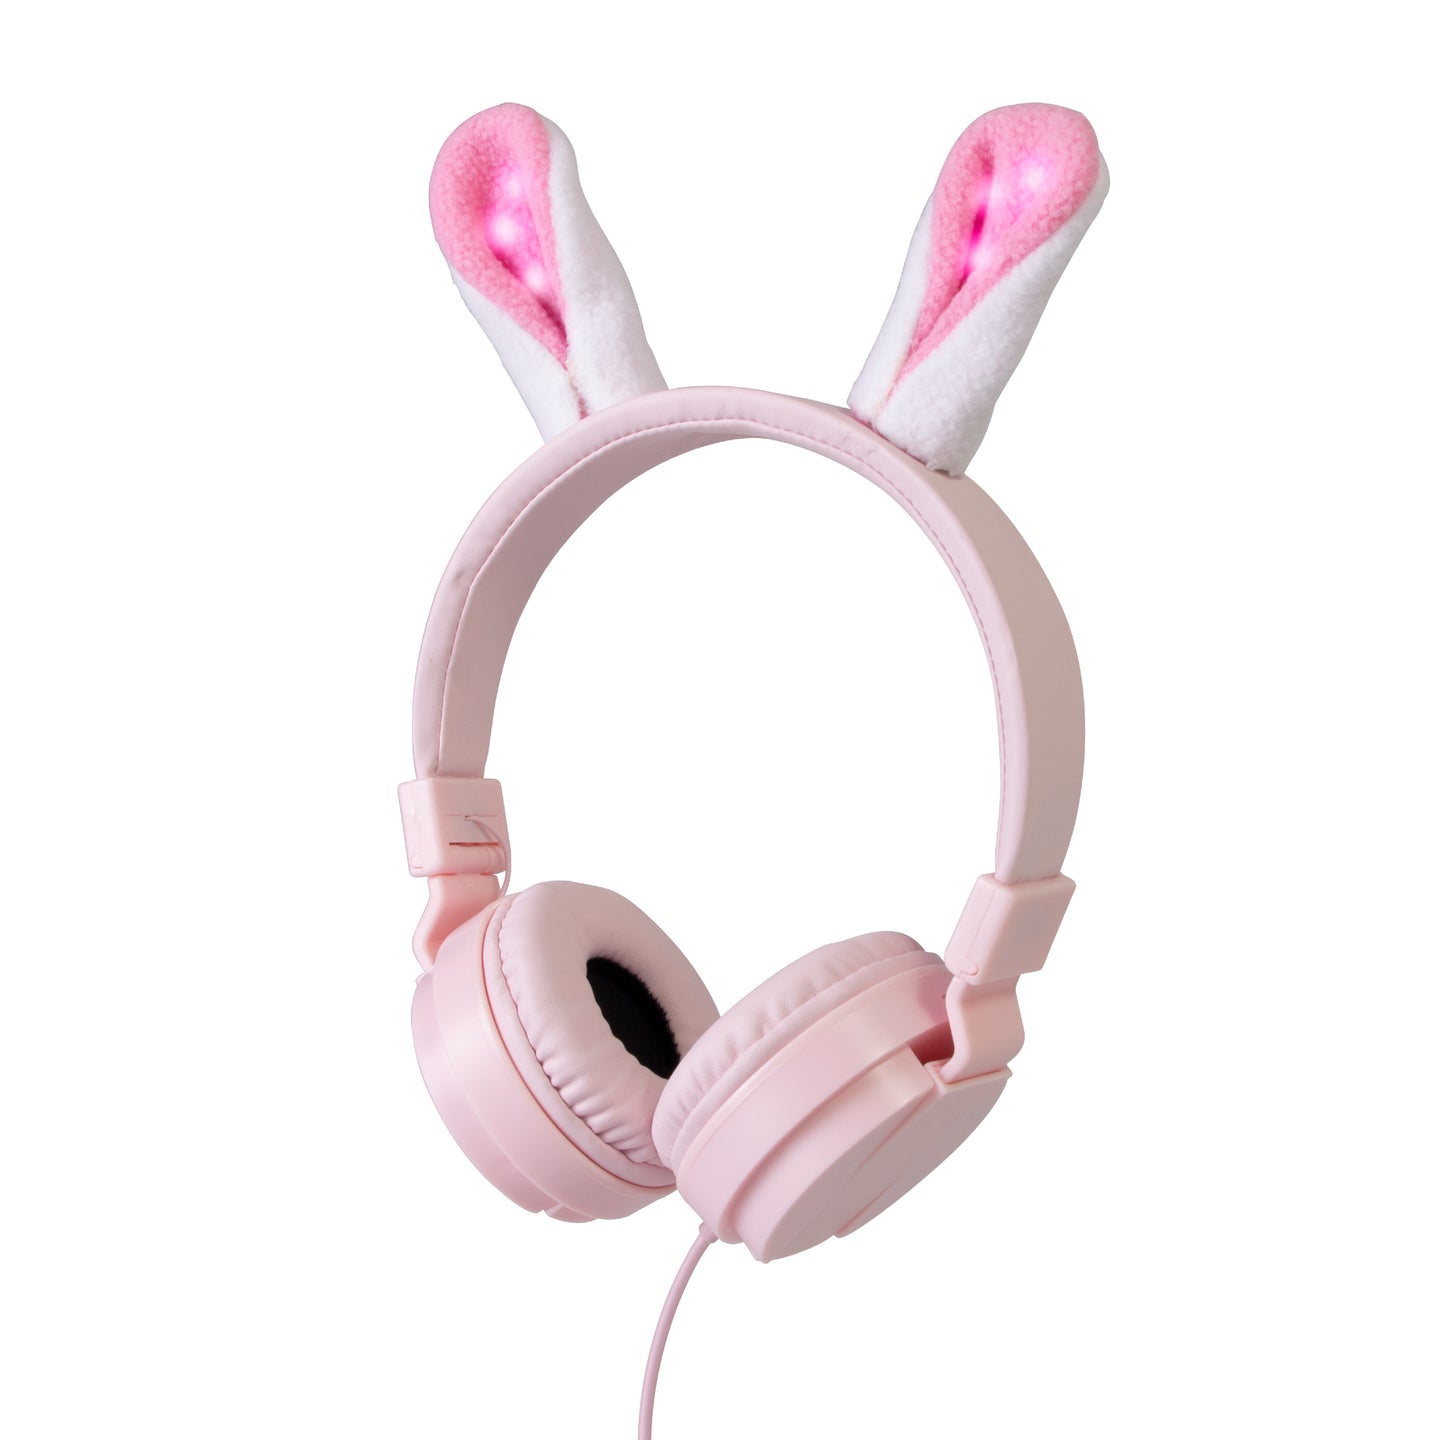 Kids Bunny Wired On-Ear headphones magnetic ears with LED lights